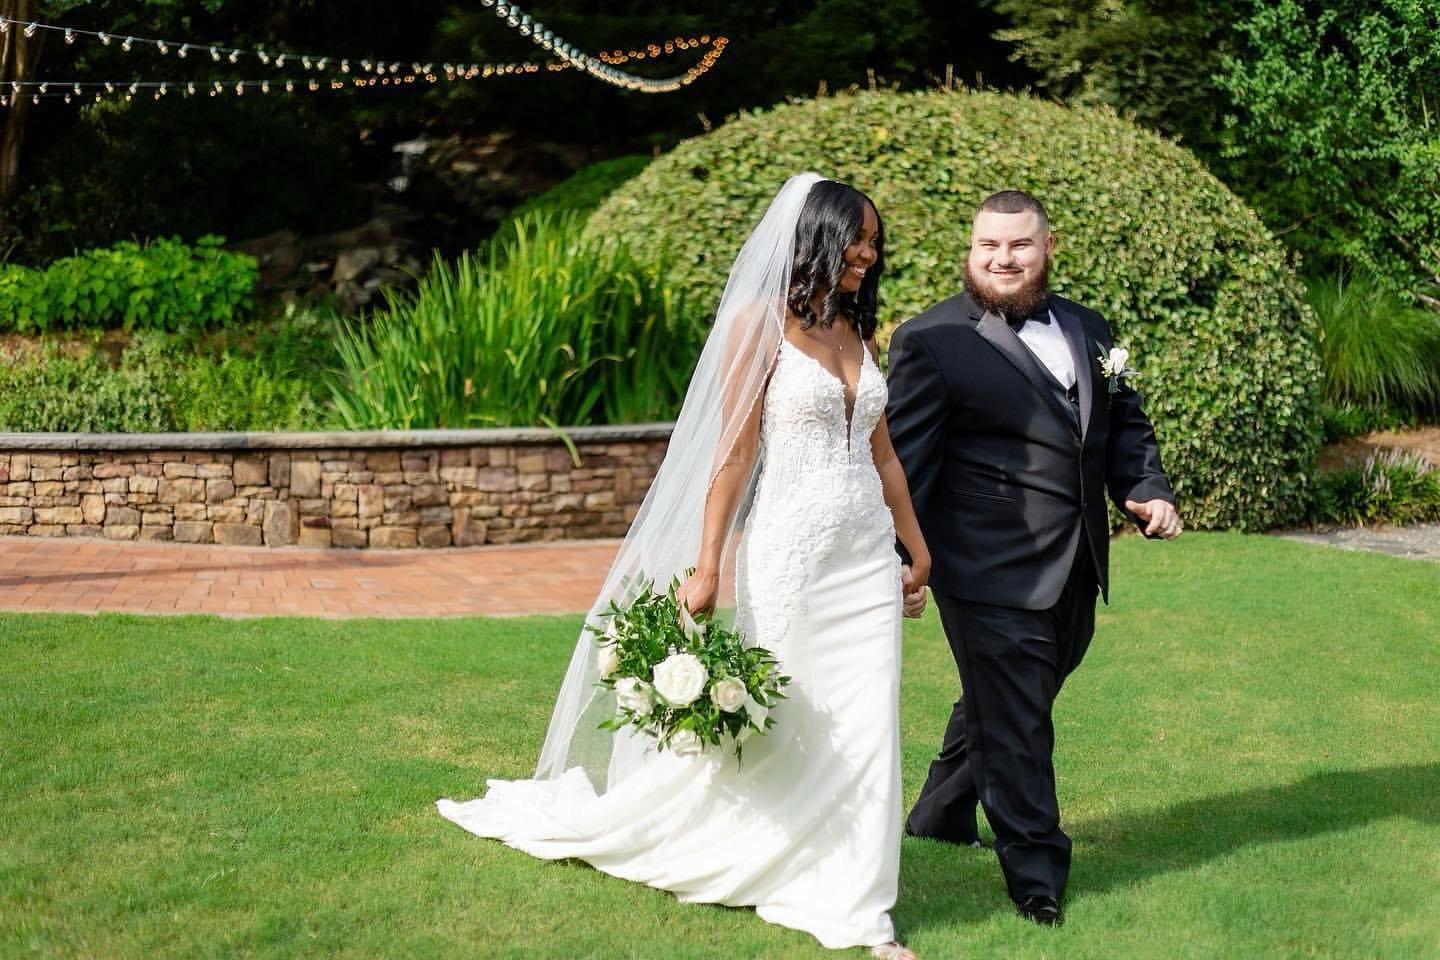 Walking happily into the season that Little Gardens is its most green and vibrant 💚

Photo: @arietphotography 
Venue: Glittlegardensweddings
Floral + Decor: &copy;adedesignstudio
Catering + Service: @a_divine_event
Gown: @belfiorebridal
Suit: @mensw